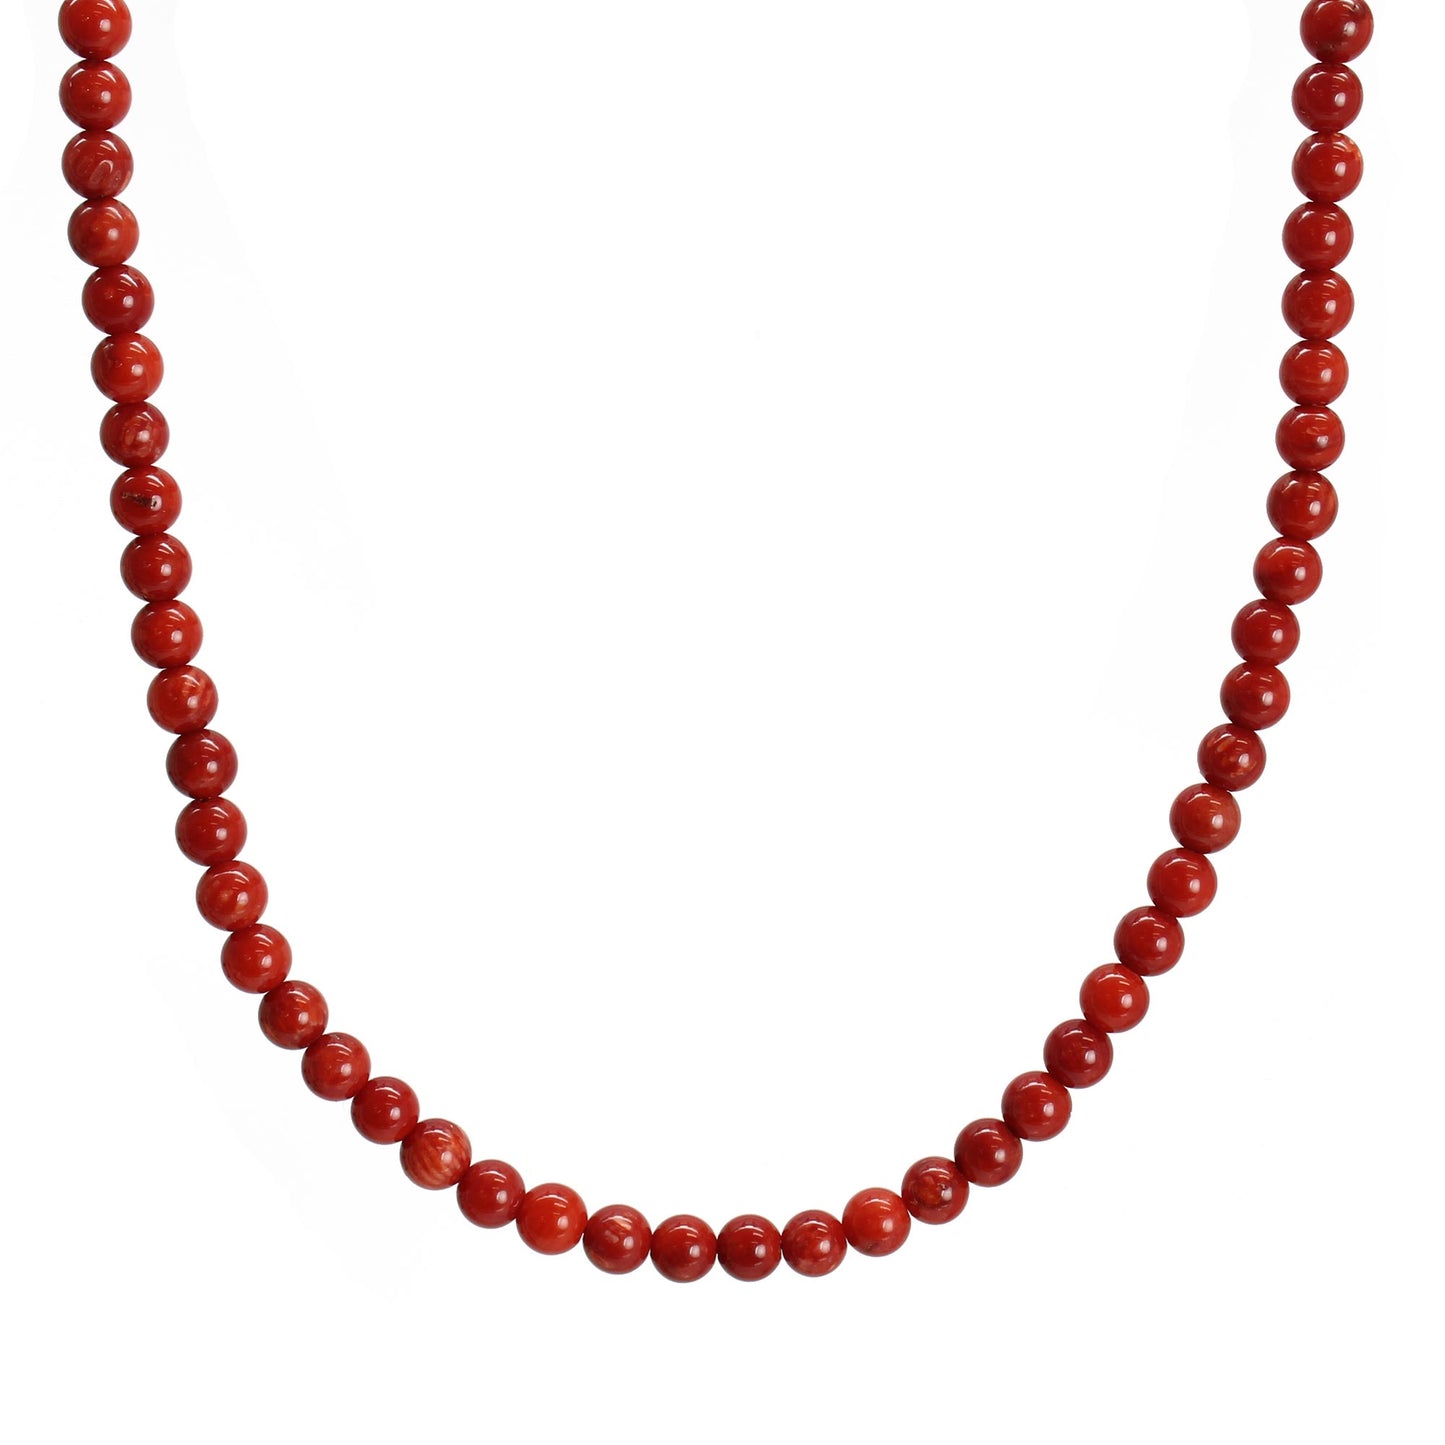 Red Coral Choker Necklace, Tiny 2mm Bright Red Gemstone Necklace – Kathy  Bankston